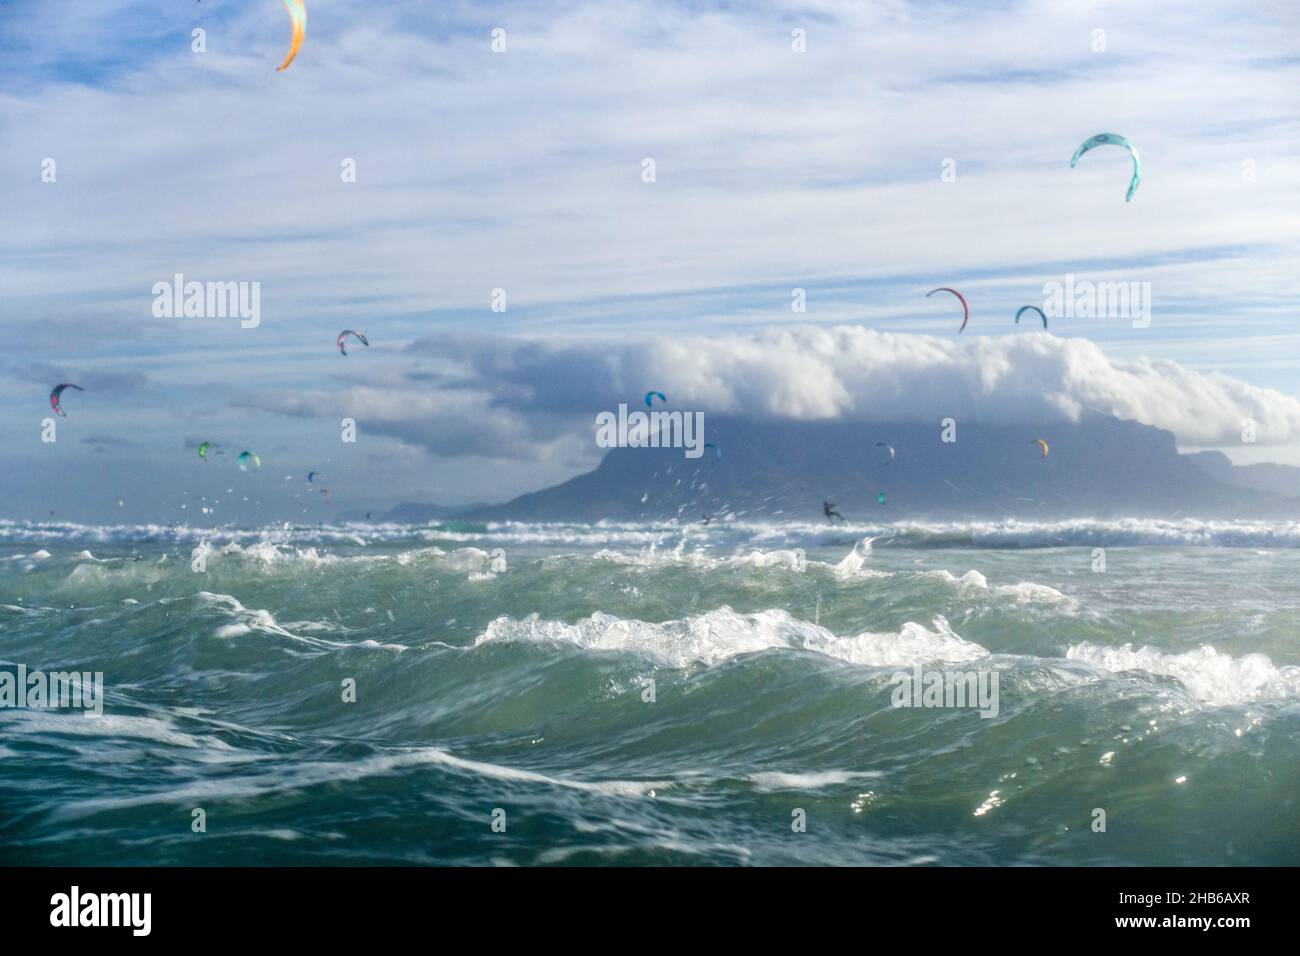 Kitesurfers on rough waves in Blouberg, Cape Town, South Africa Stock Photo